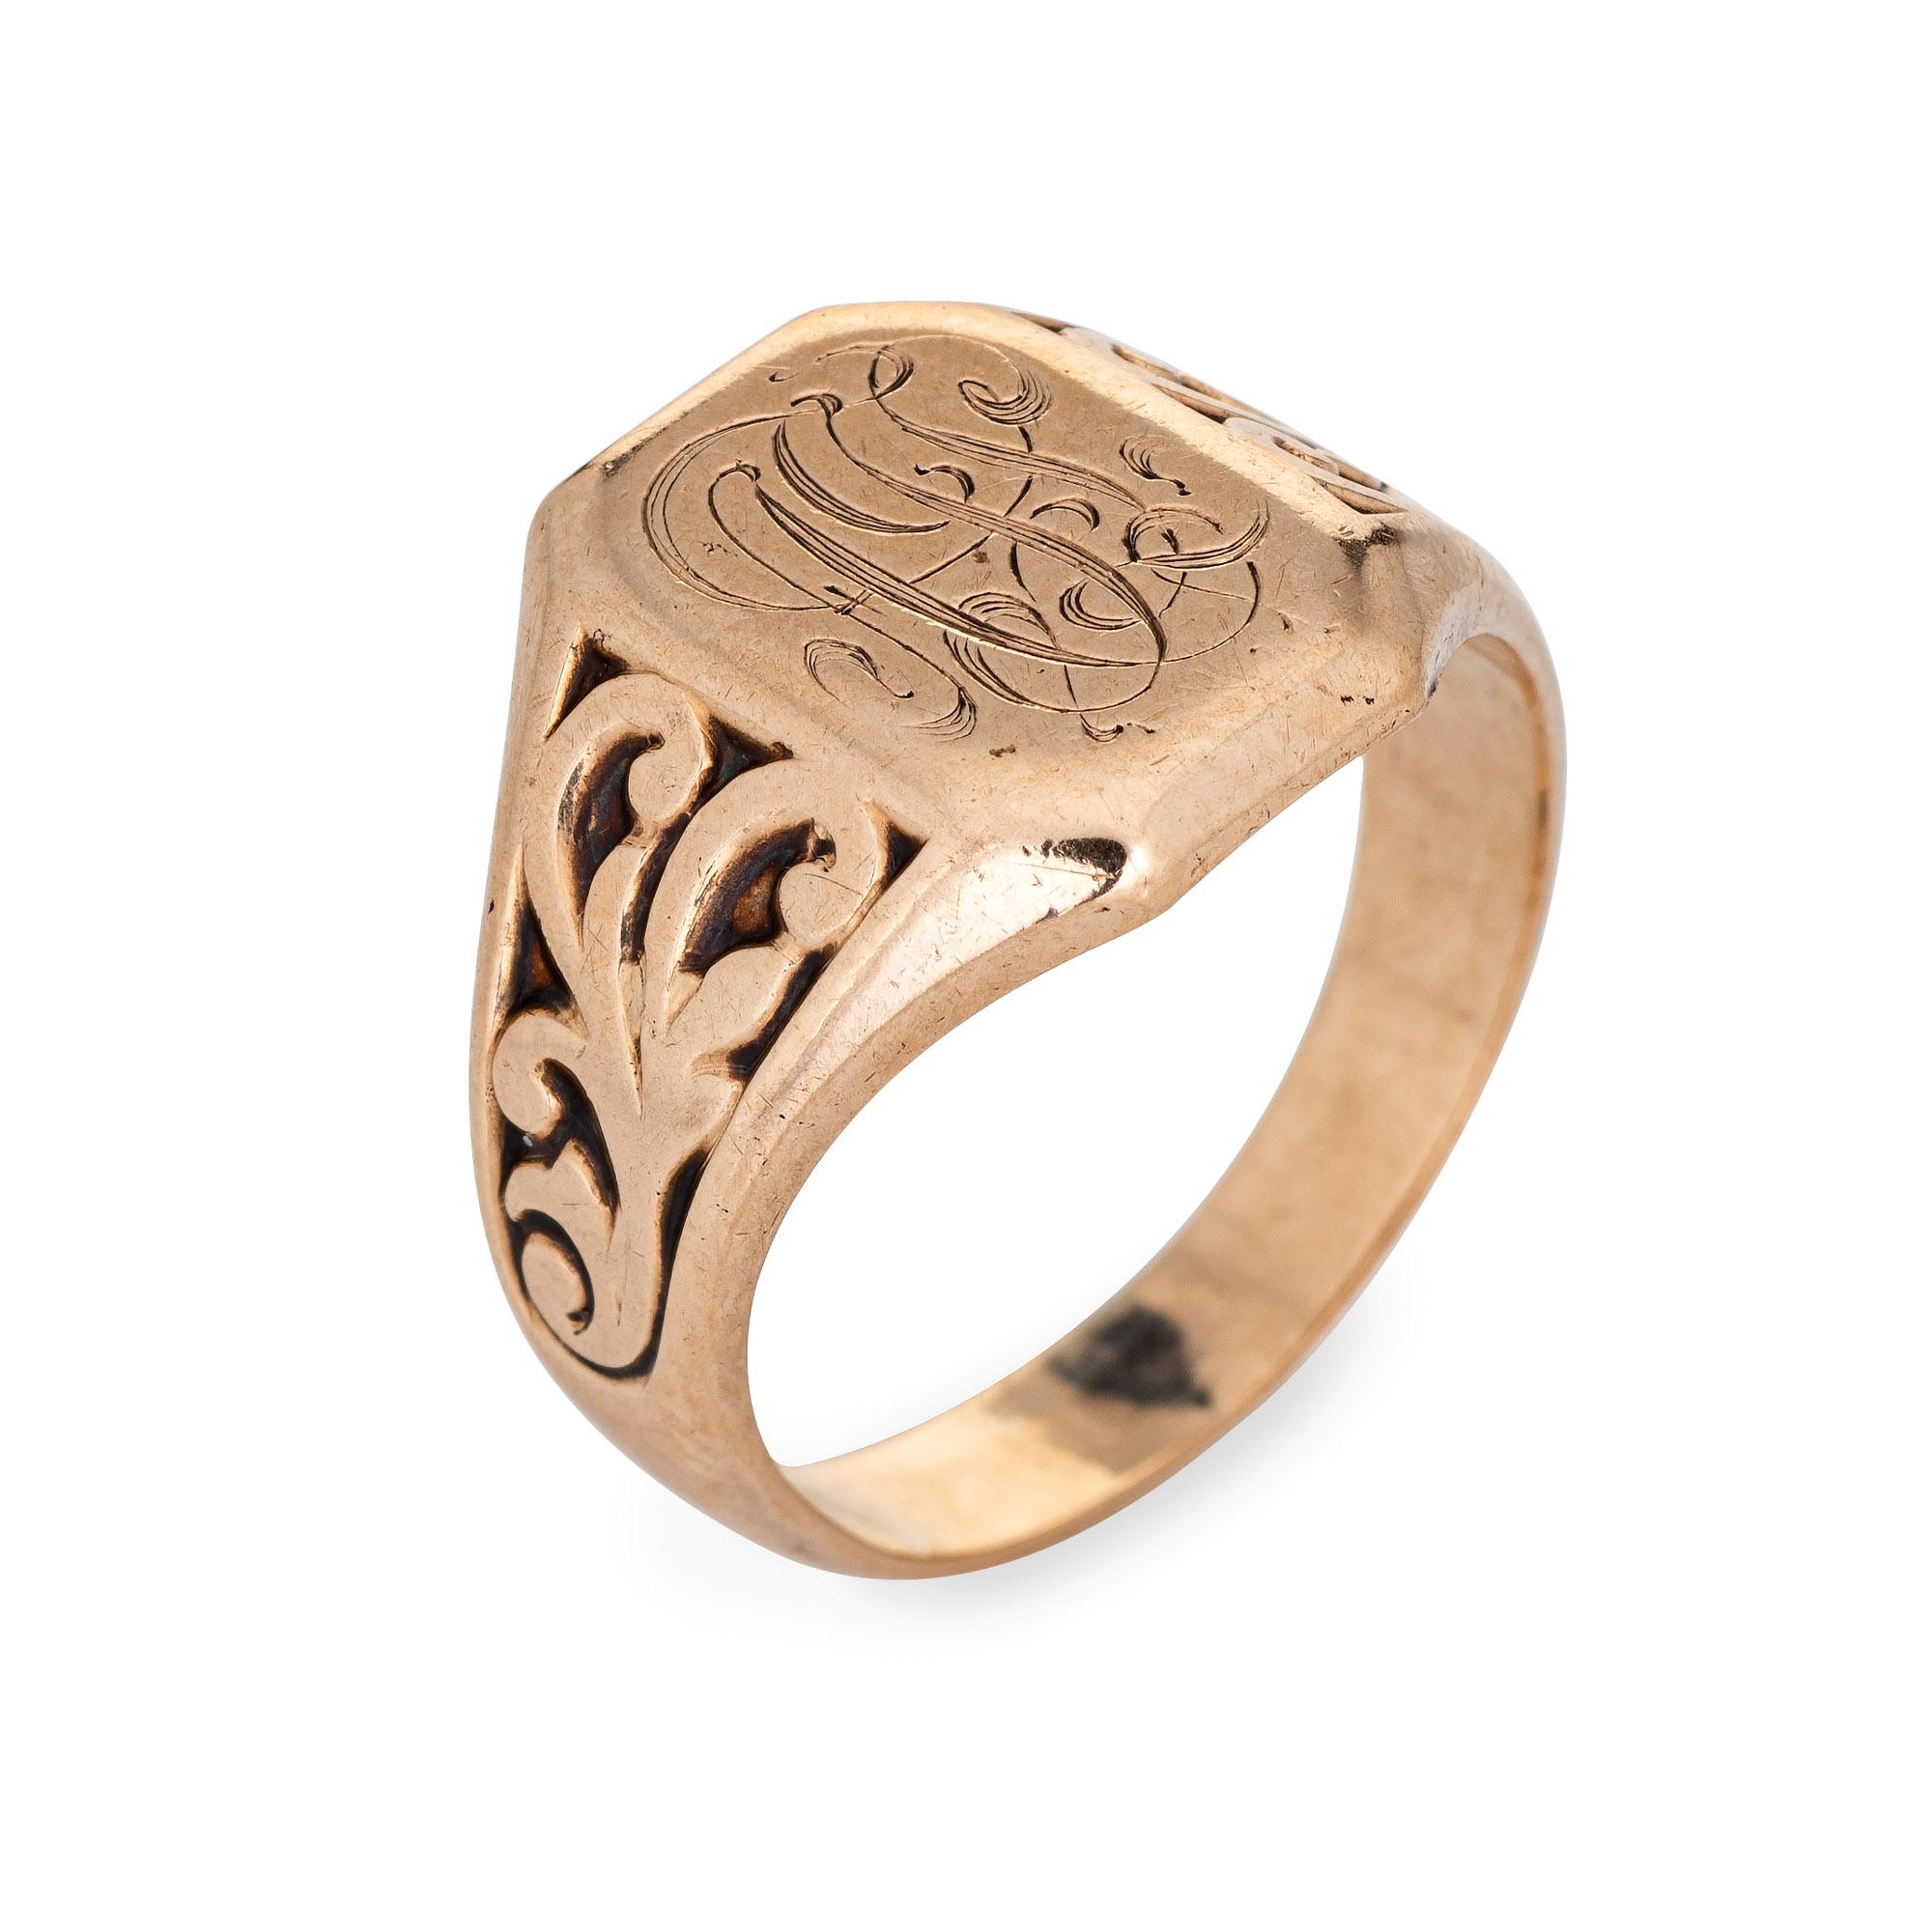 Finely detailed vintage Art Deco era square signet ring (circa 1920s to 1930s), crafted in 10 karat rose gold. 

The square signet is engraved with the initials (from what we can decipher) 